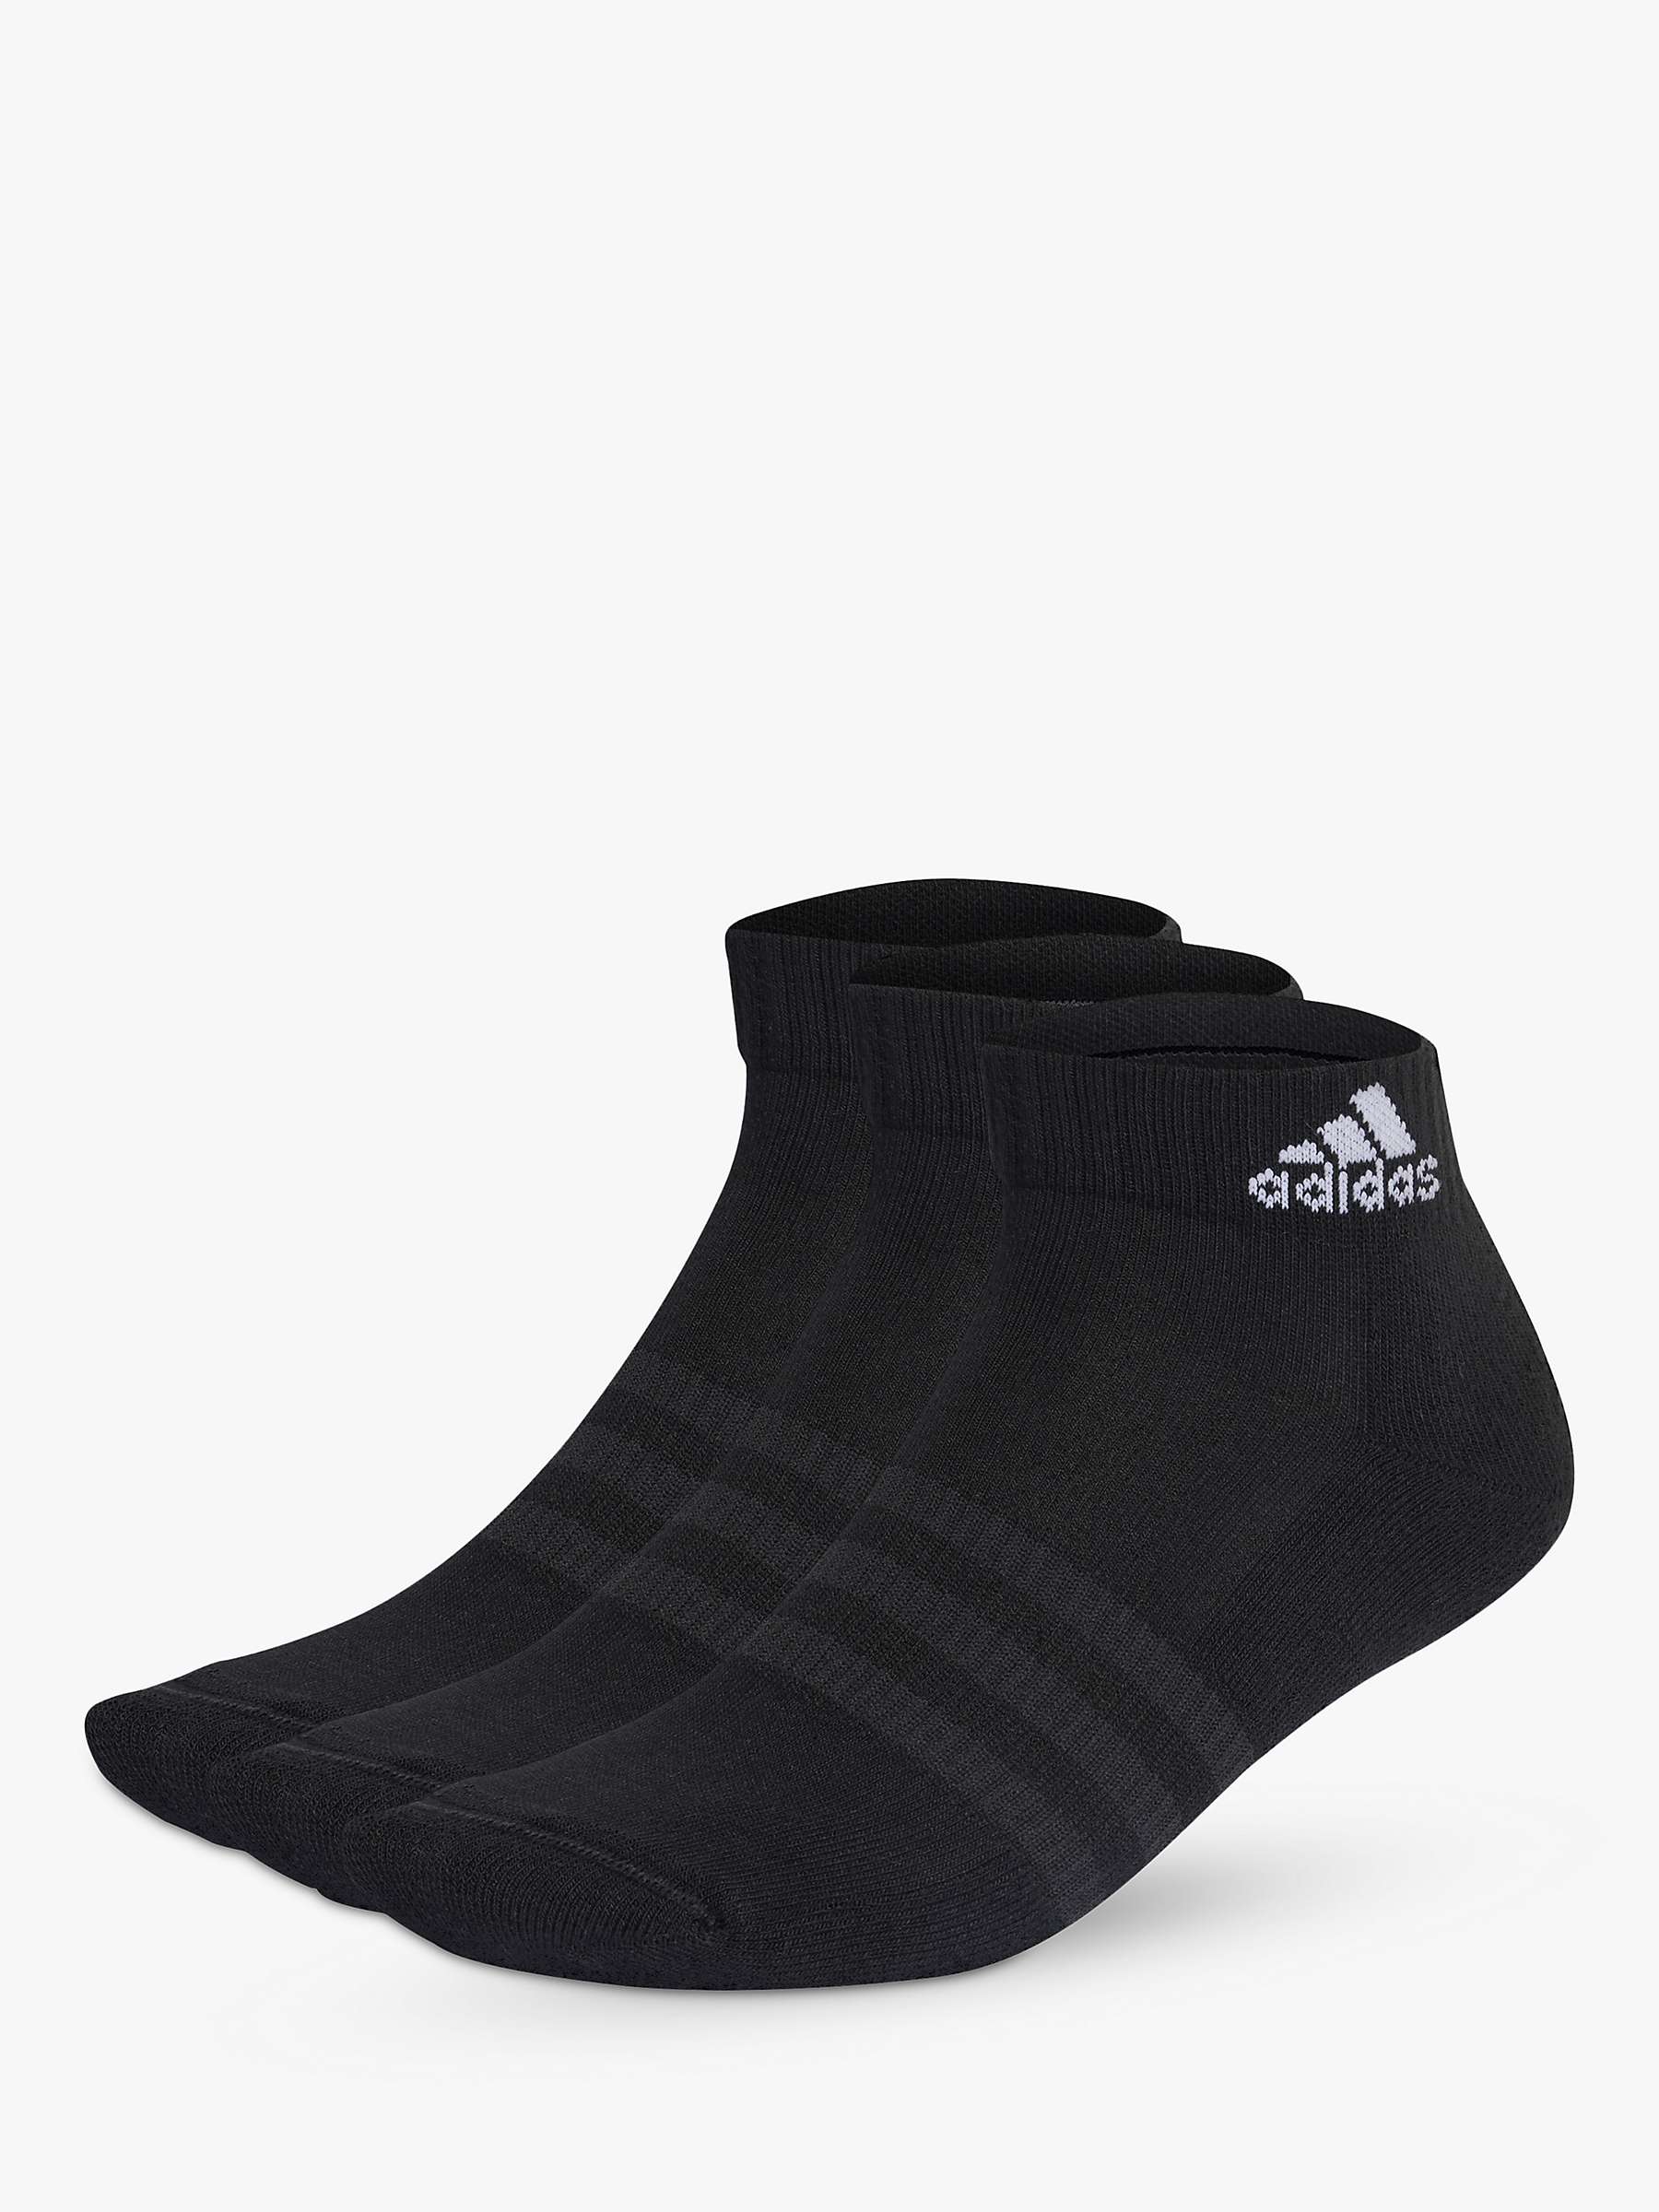 Buy adidas Cushioned Ankle Gym Socks, Pack of 3 Online at johnlewis.com